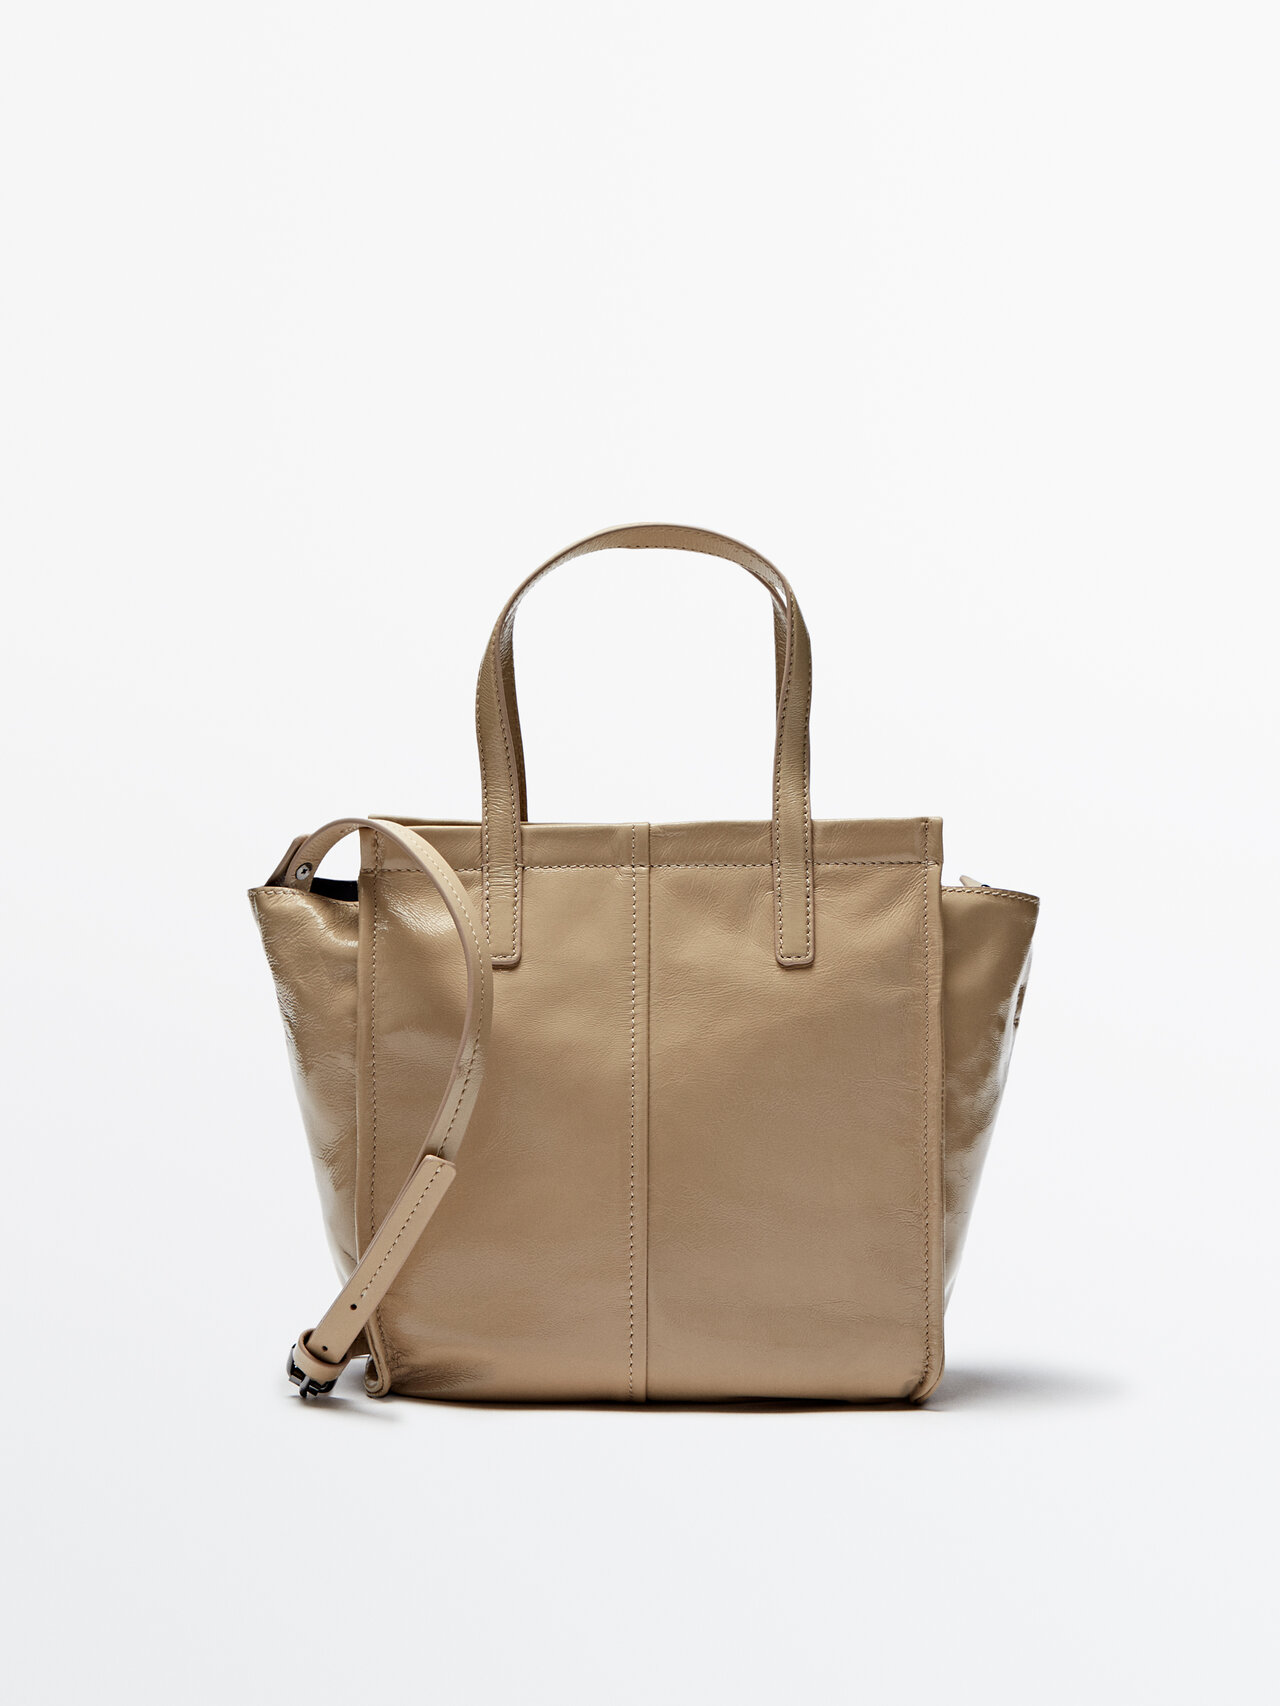 Massimo Dutti Mini Leather Tote Bag With A Crackled Finish In Beige